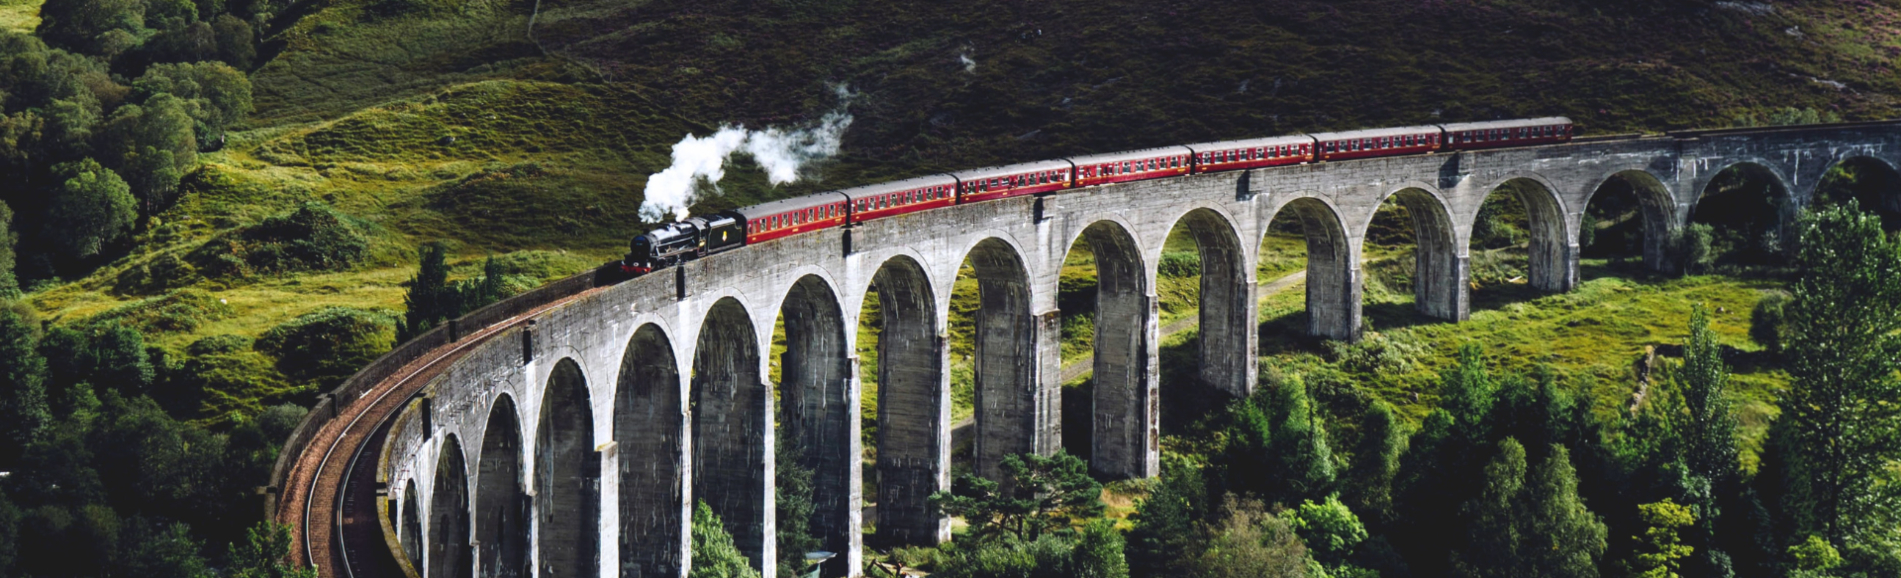 A view of a train travelling along the Glenfinnan Viaduct in Scotland